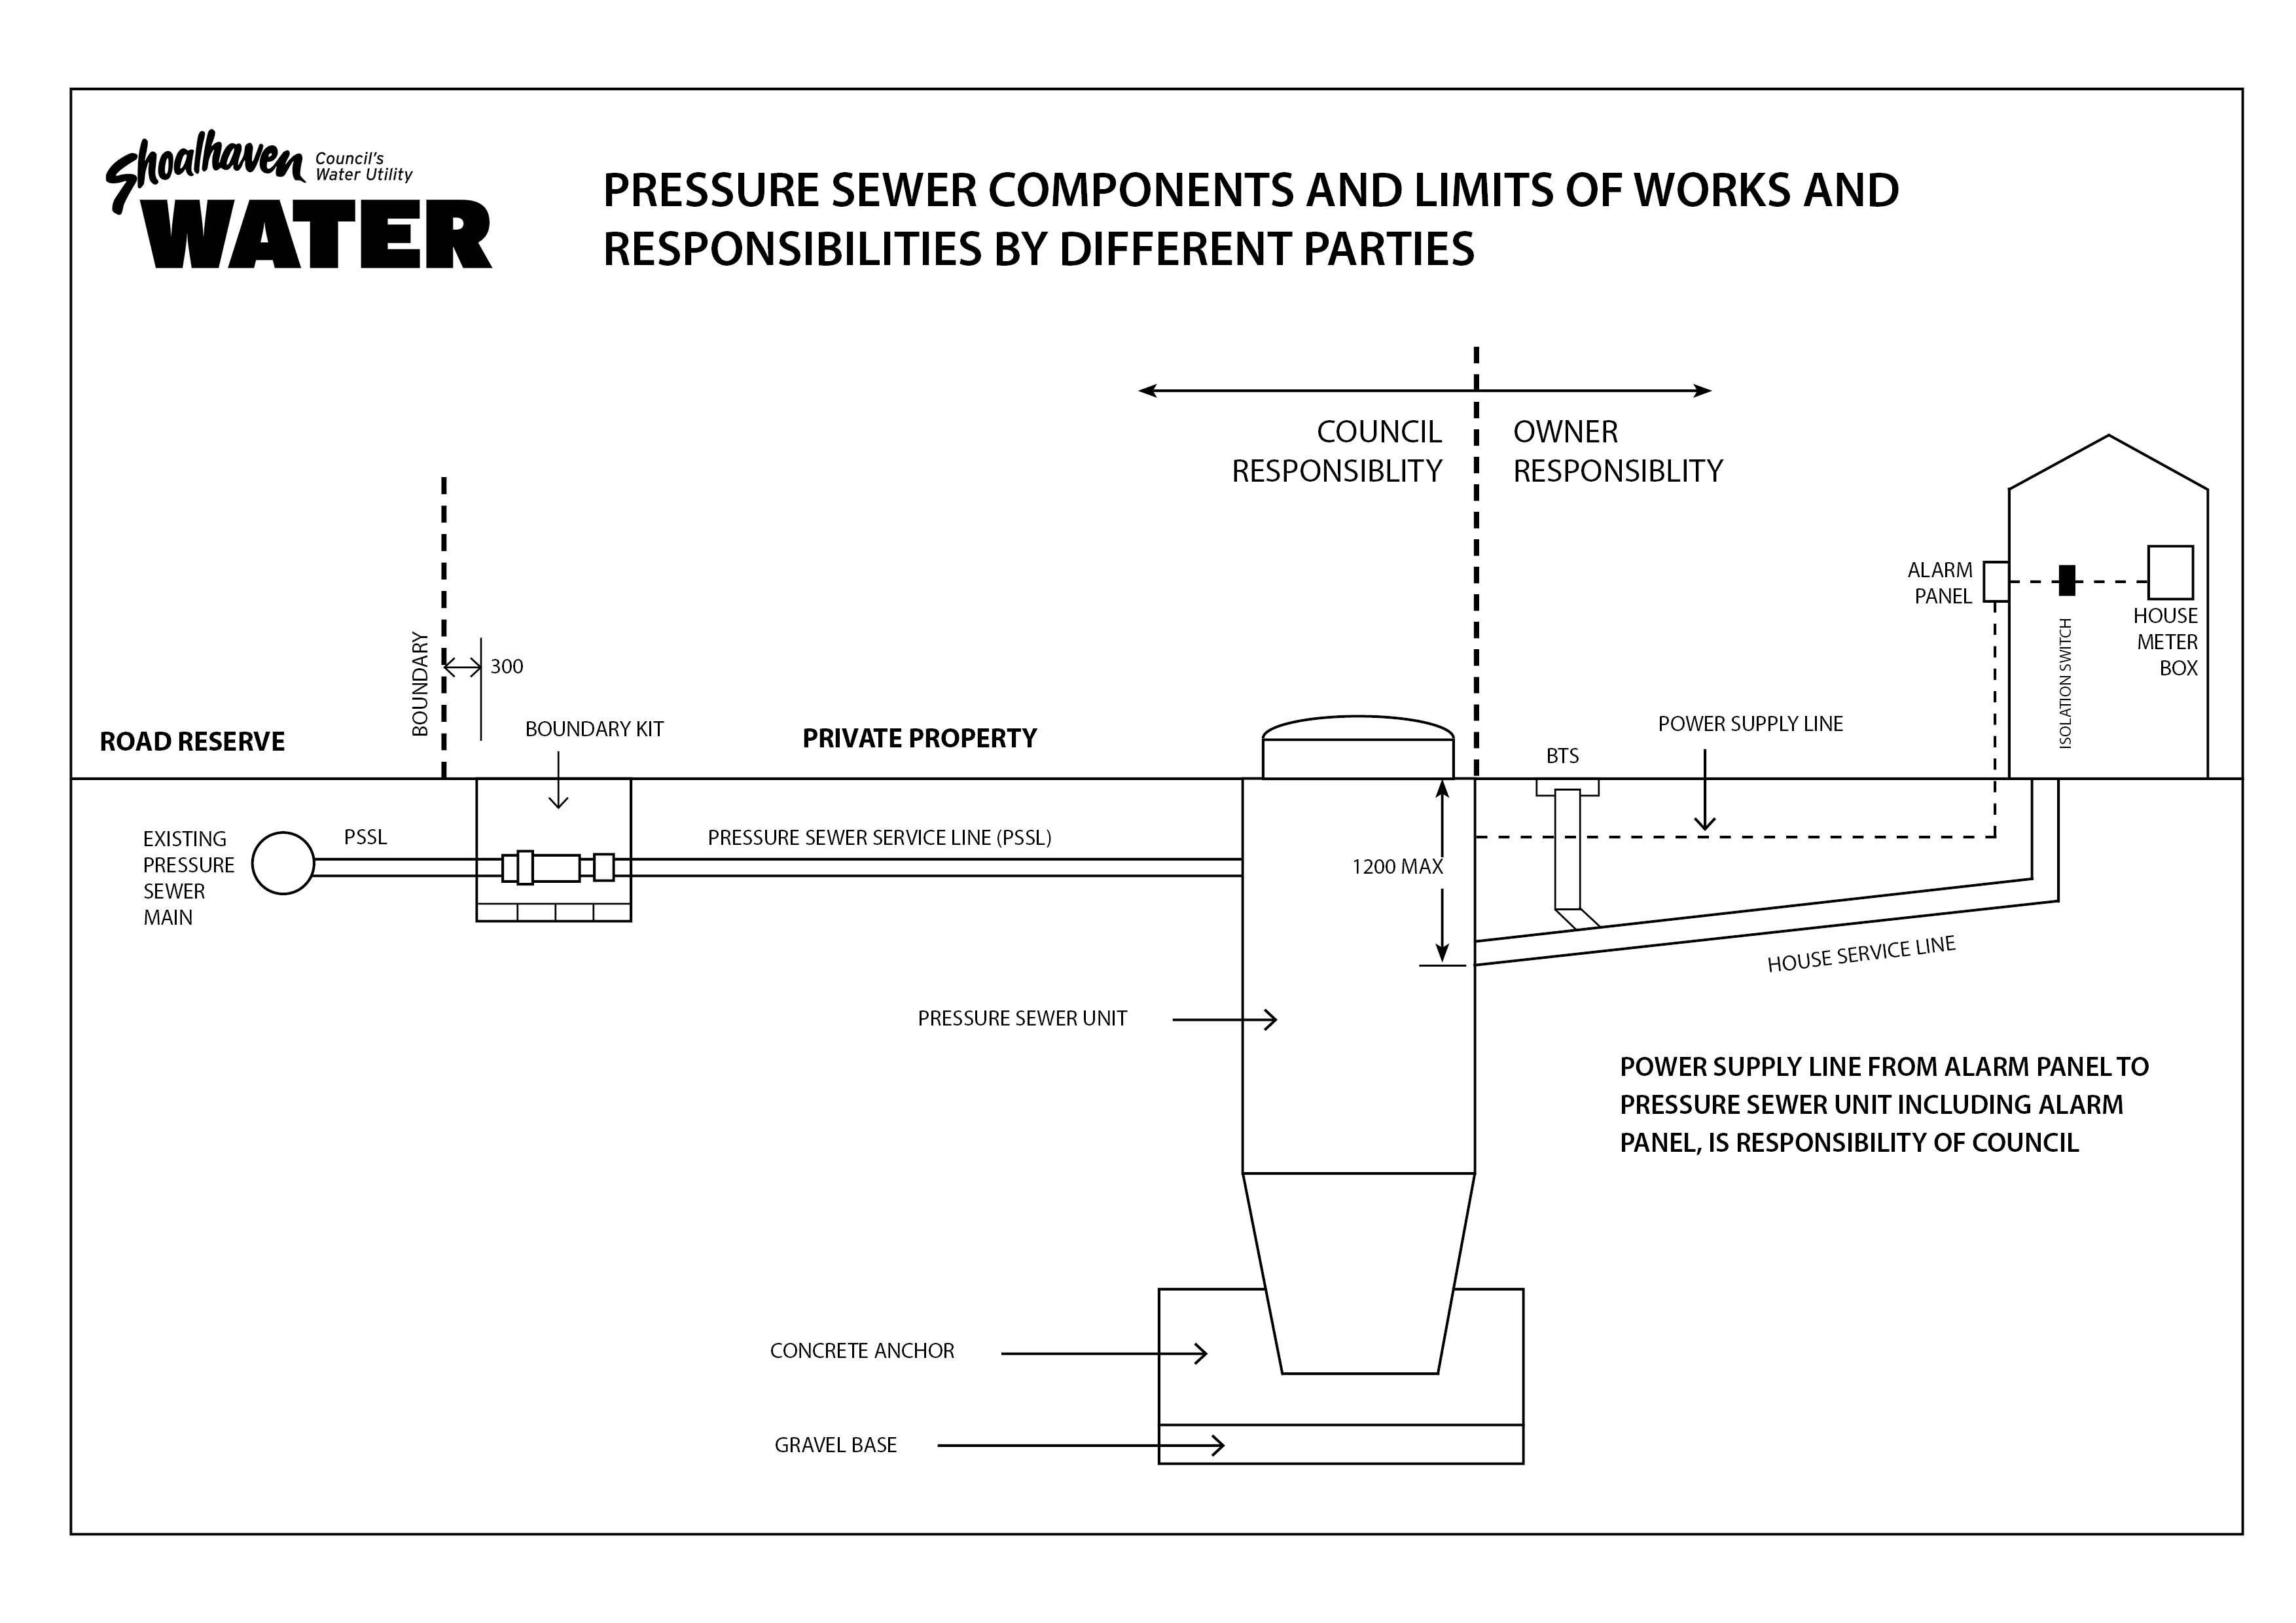 Example of pressure sewer components and responsibilities